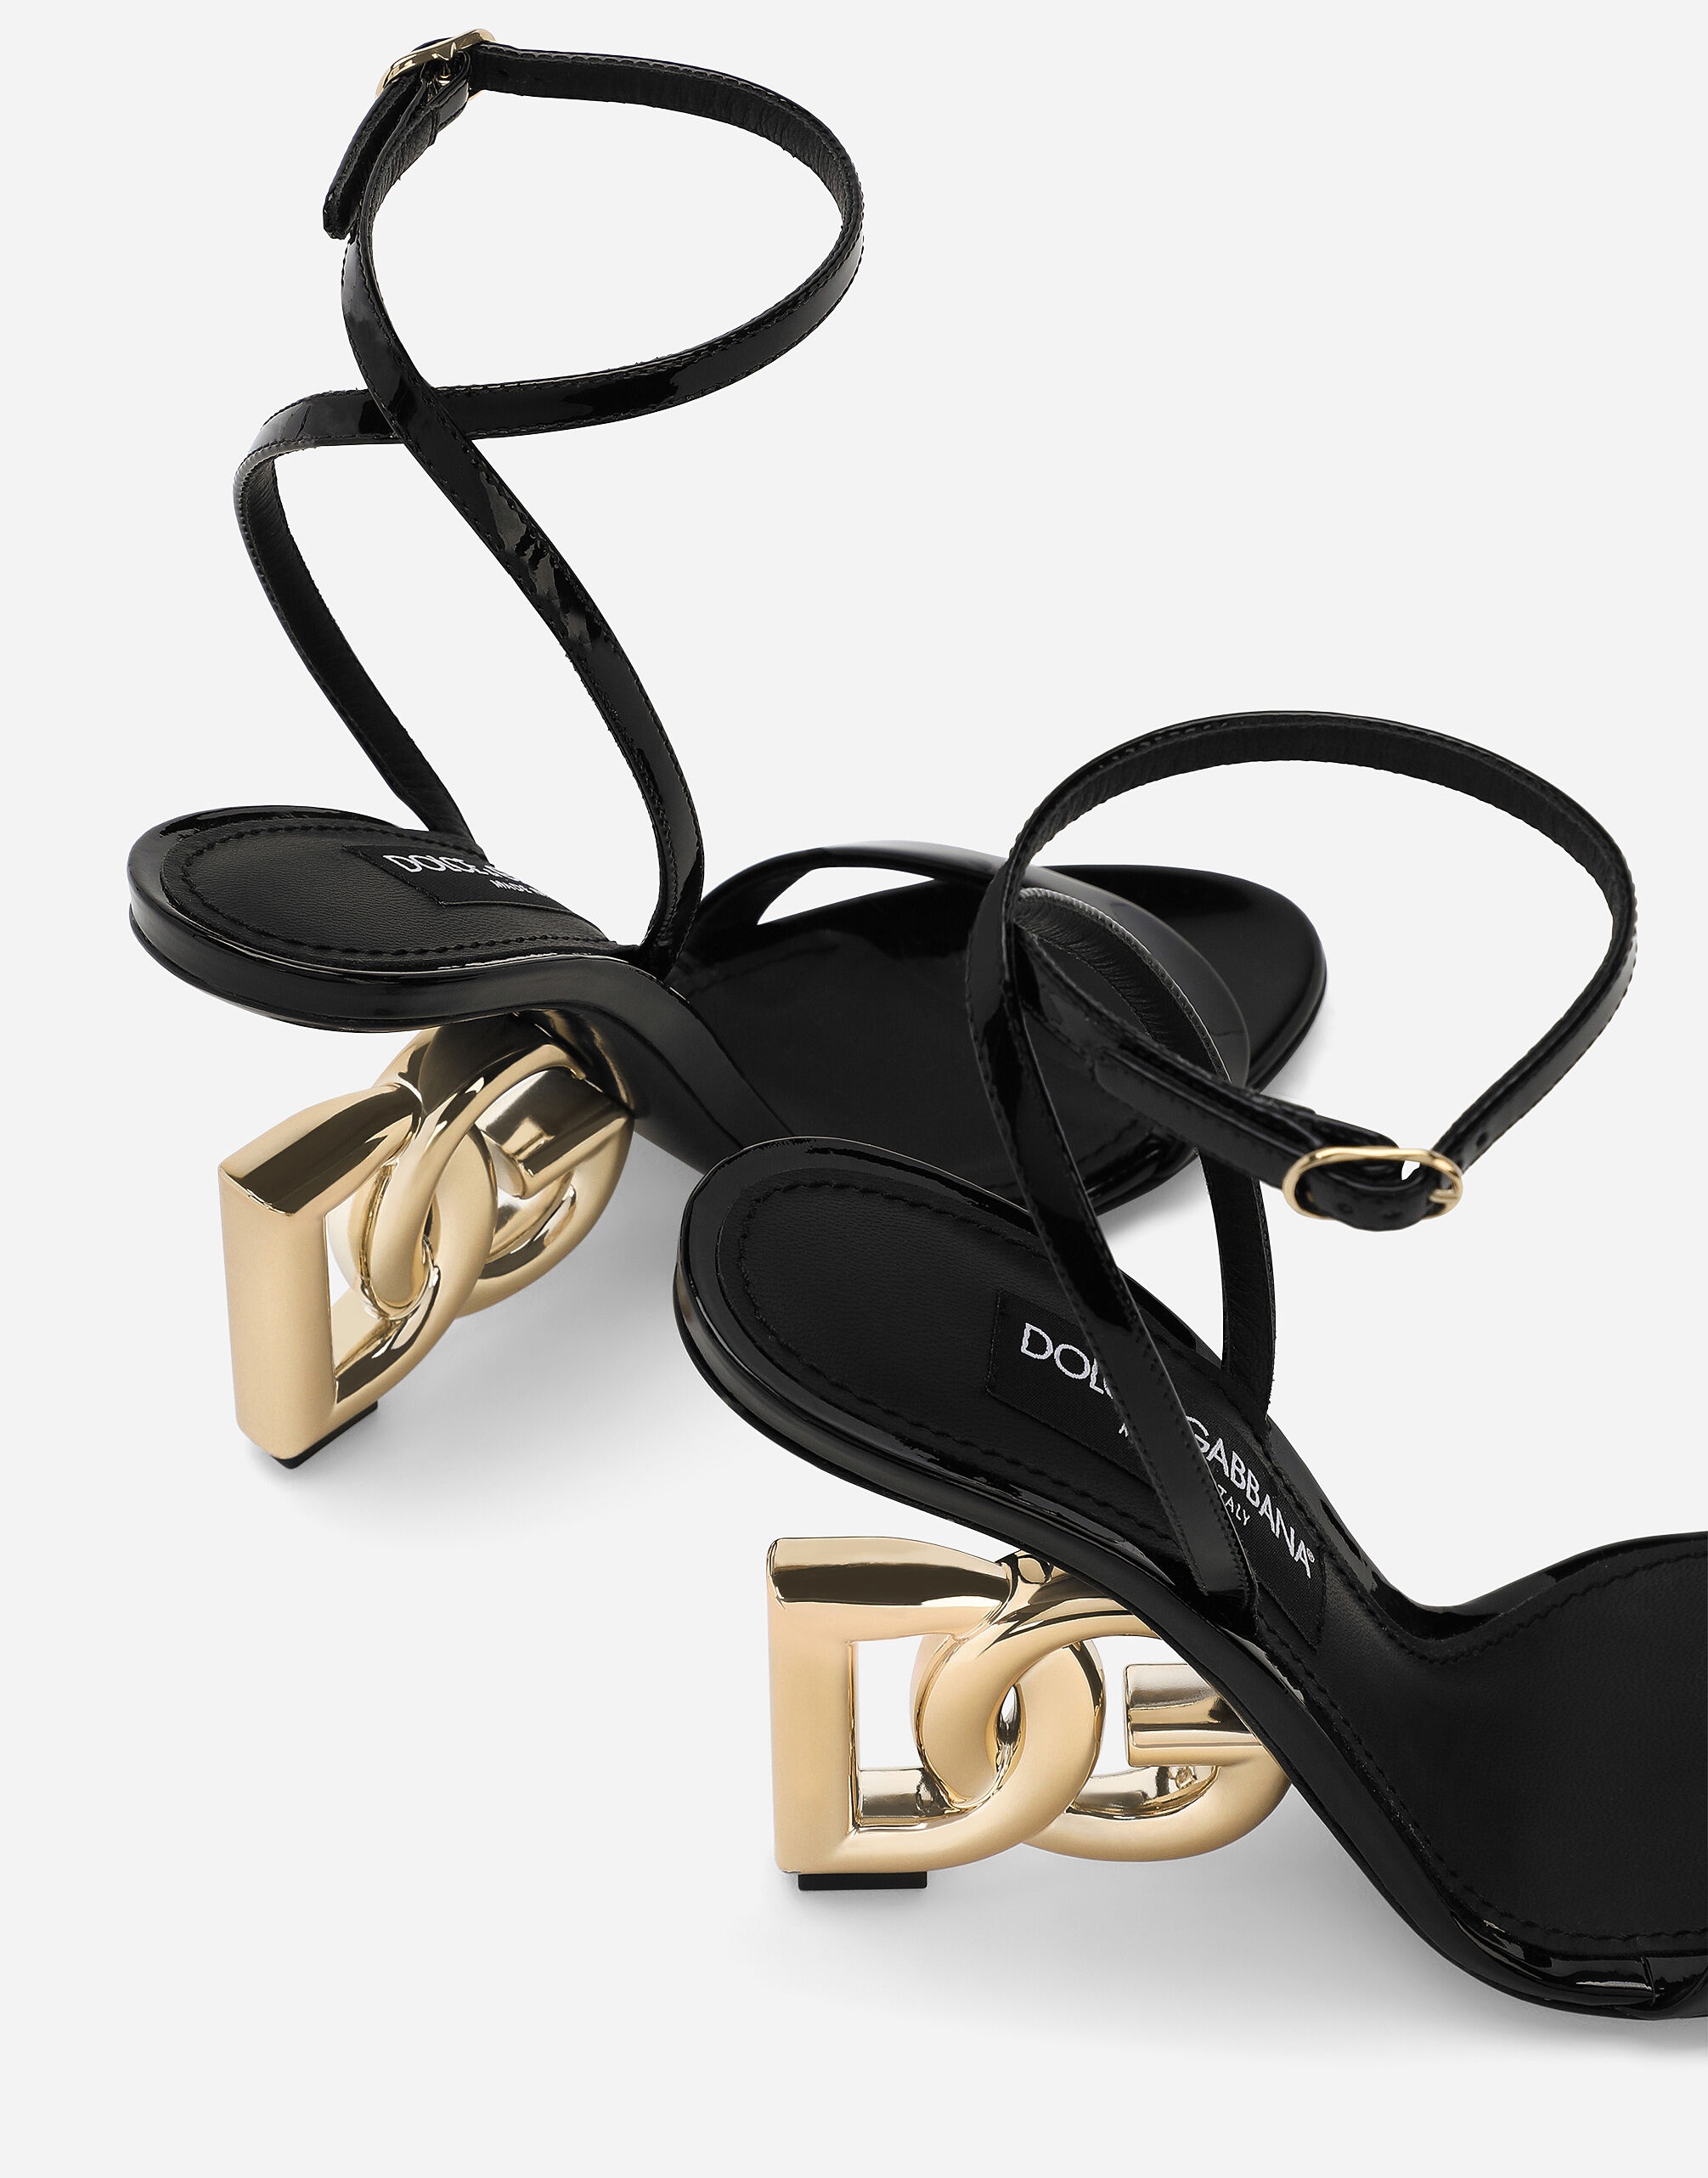 Patent leather sandals - 5